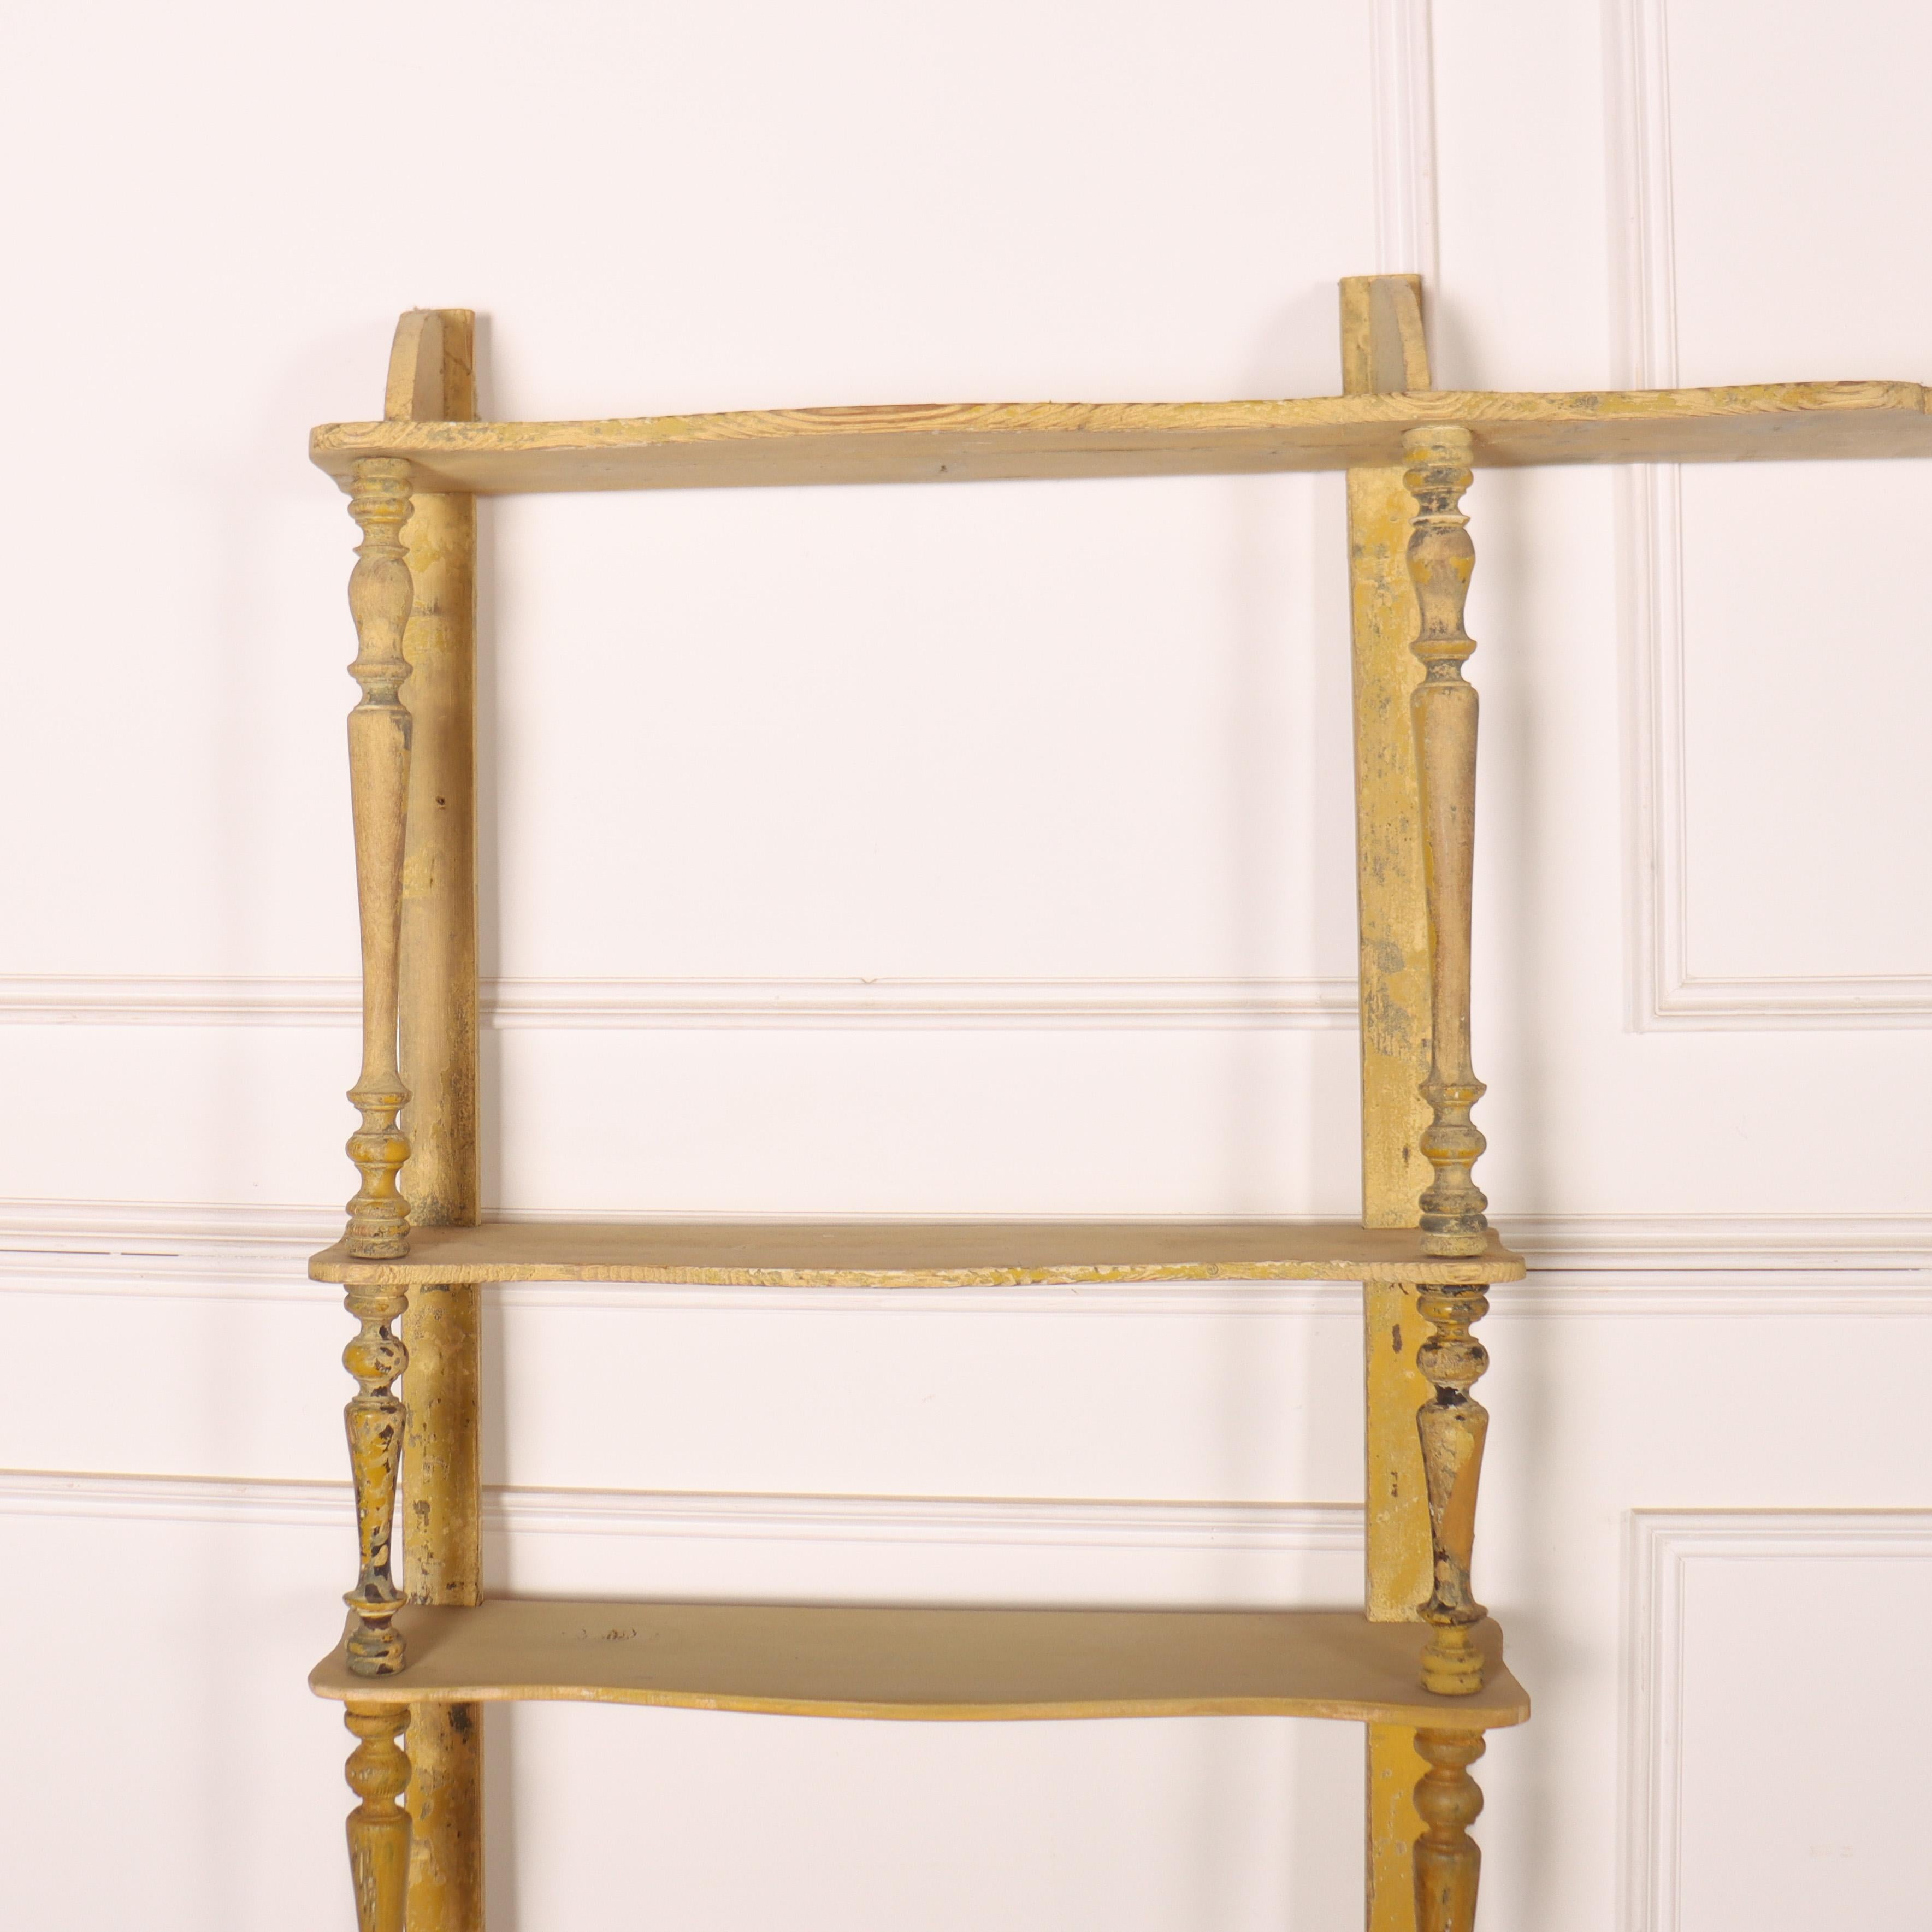 Large 19th C French original painted pine hanging rack. Lovely old worn paint. 1880.

Reference: 8095

Dimensions
66.5 inches (169 cms) Wide
7 inches (18 cms) Deep
67 inches (170 cms) High